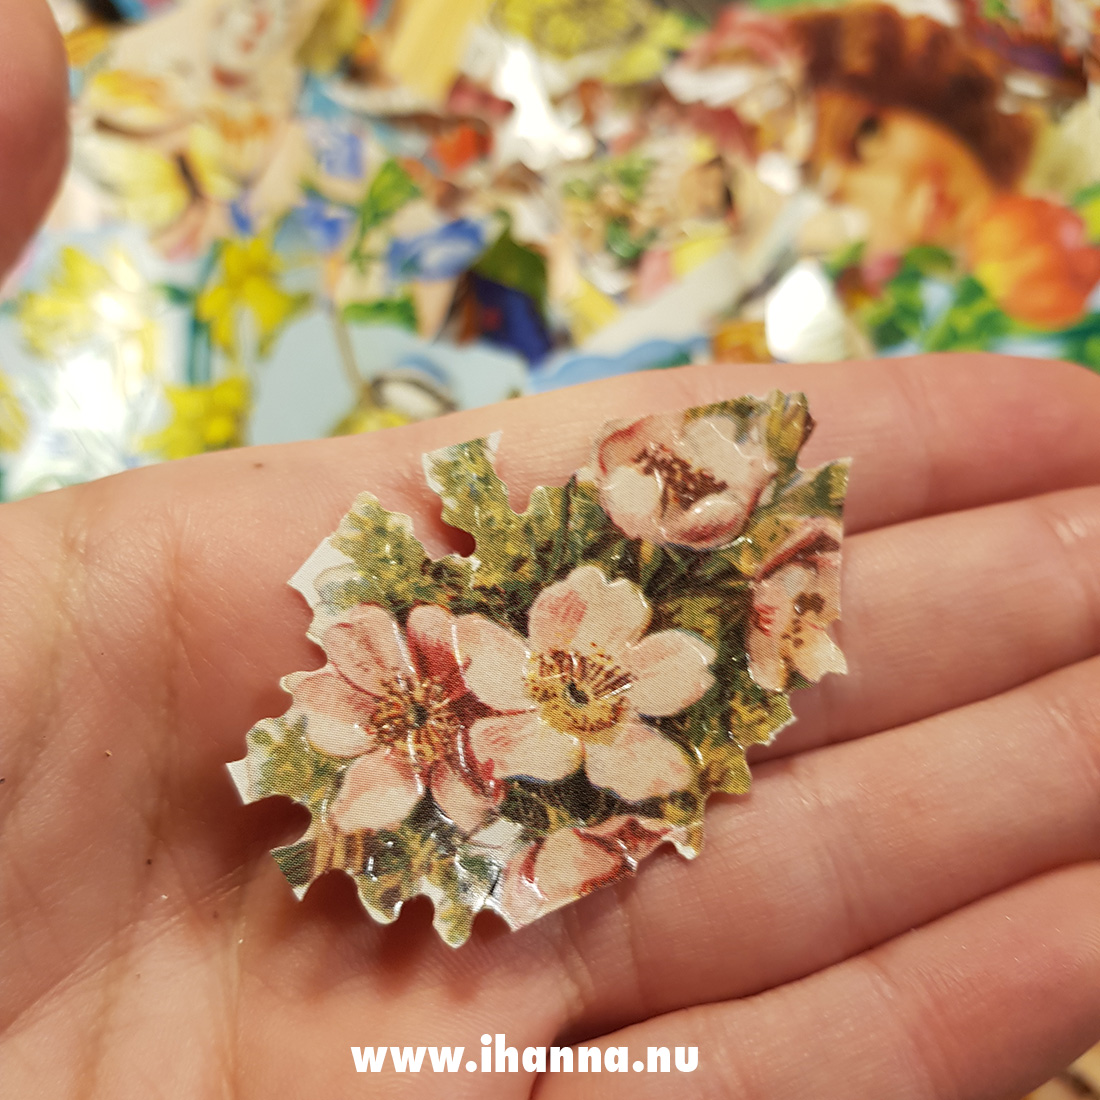 Glanzbilder or Scrap Die-cut collectable images - Photo by iHanna